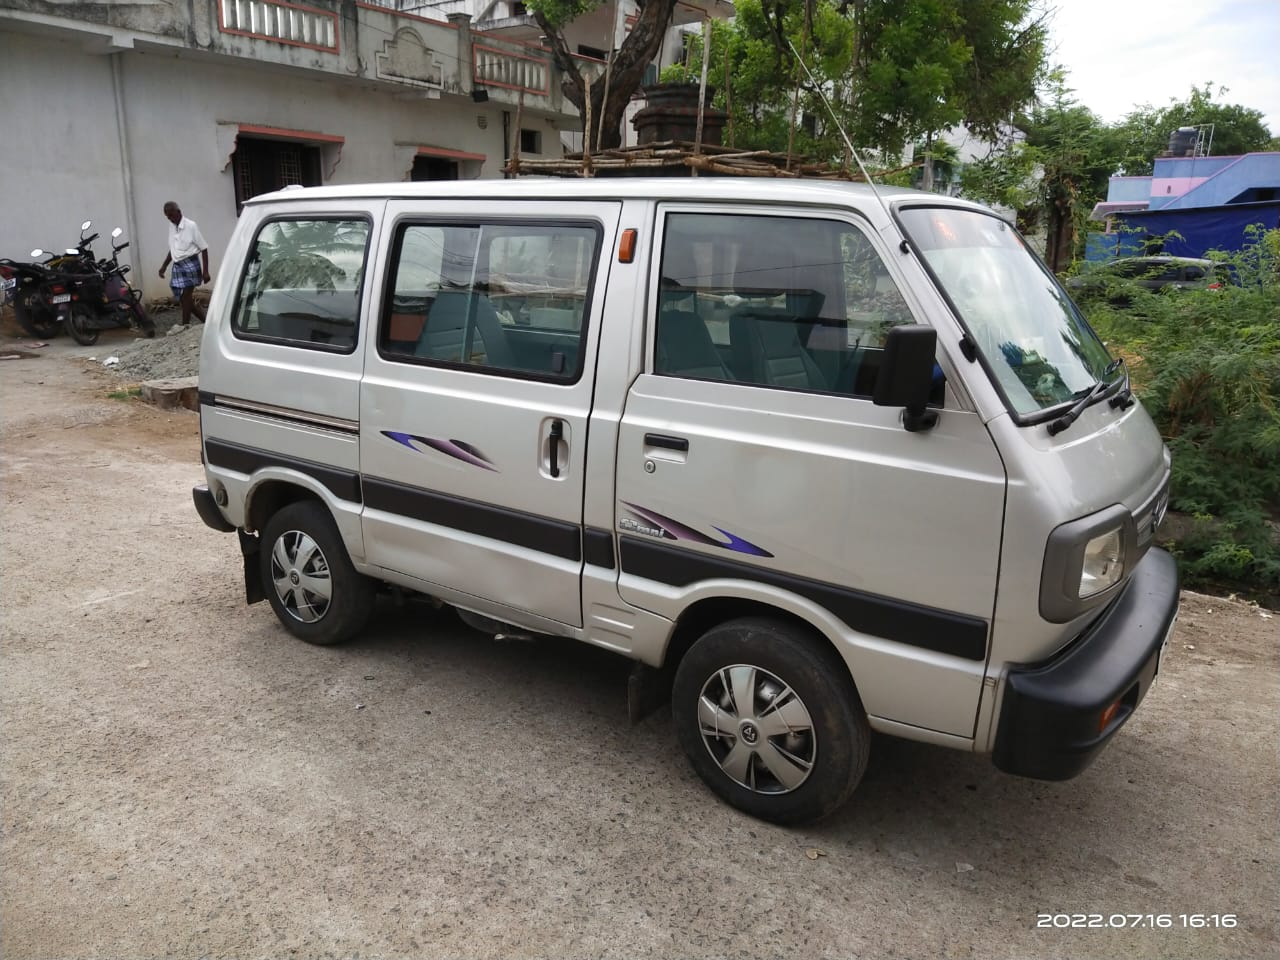 3871-for-sale-Maruthi-Suzuki-Omni-Petrol-Second-Owner-2016-TN-registered-rs-240000